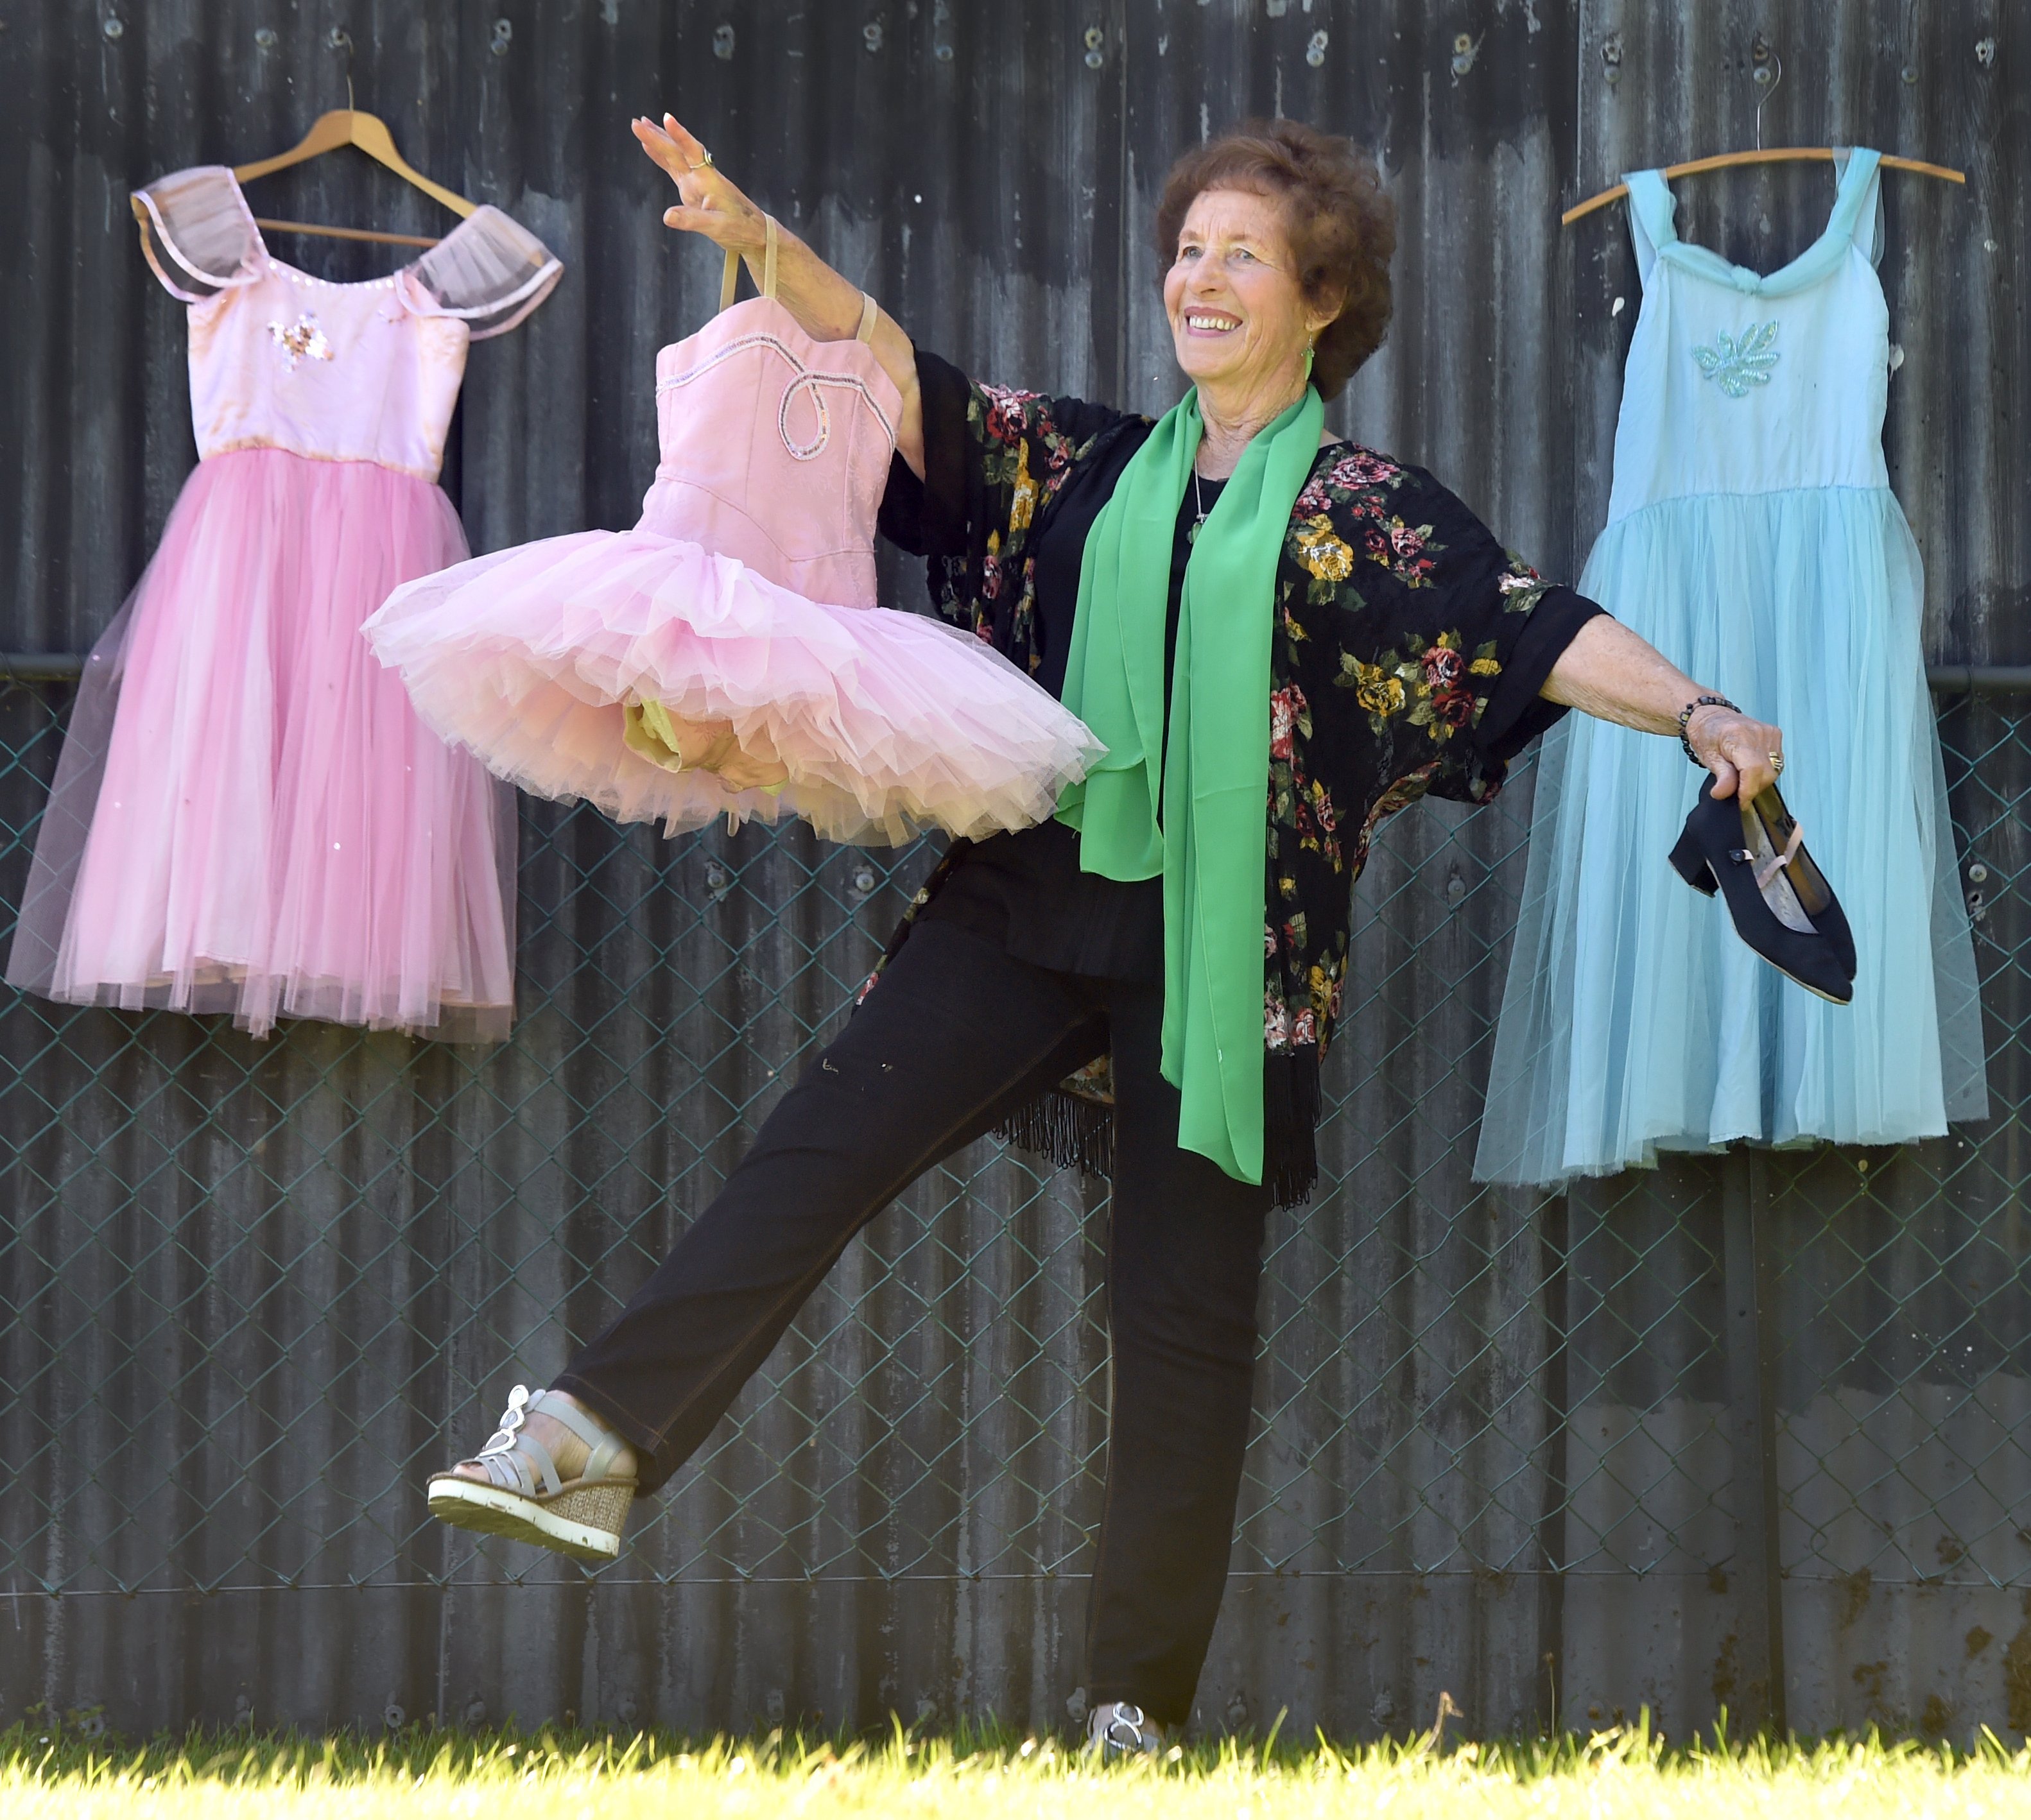 Lorraine Fodie has retired after teaching thousands of children to dance. PHOTO: PETER MCINTOSH